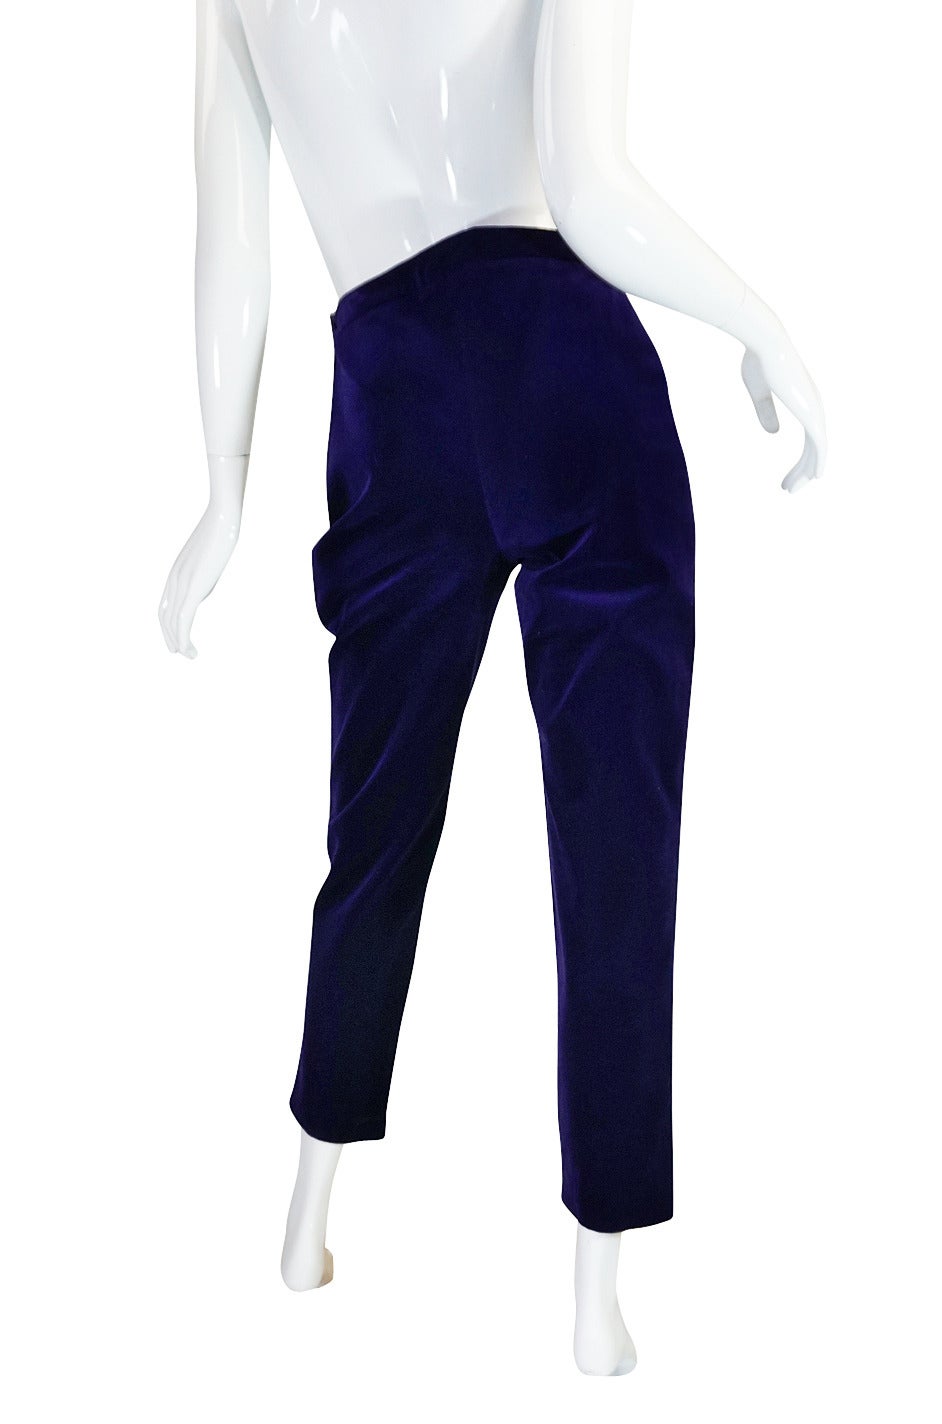 Rare 1980s Purple Velvet Chanel Cigarette Pants In Excellent Condition For Sale In Rockwood, ON